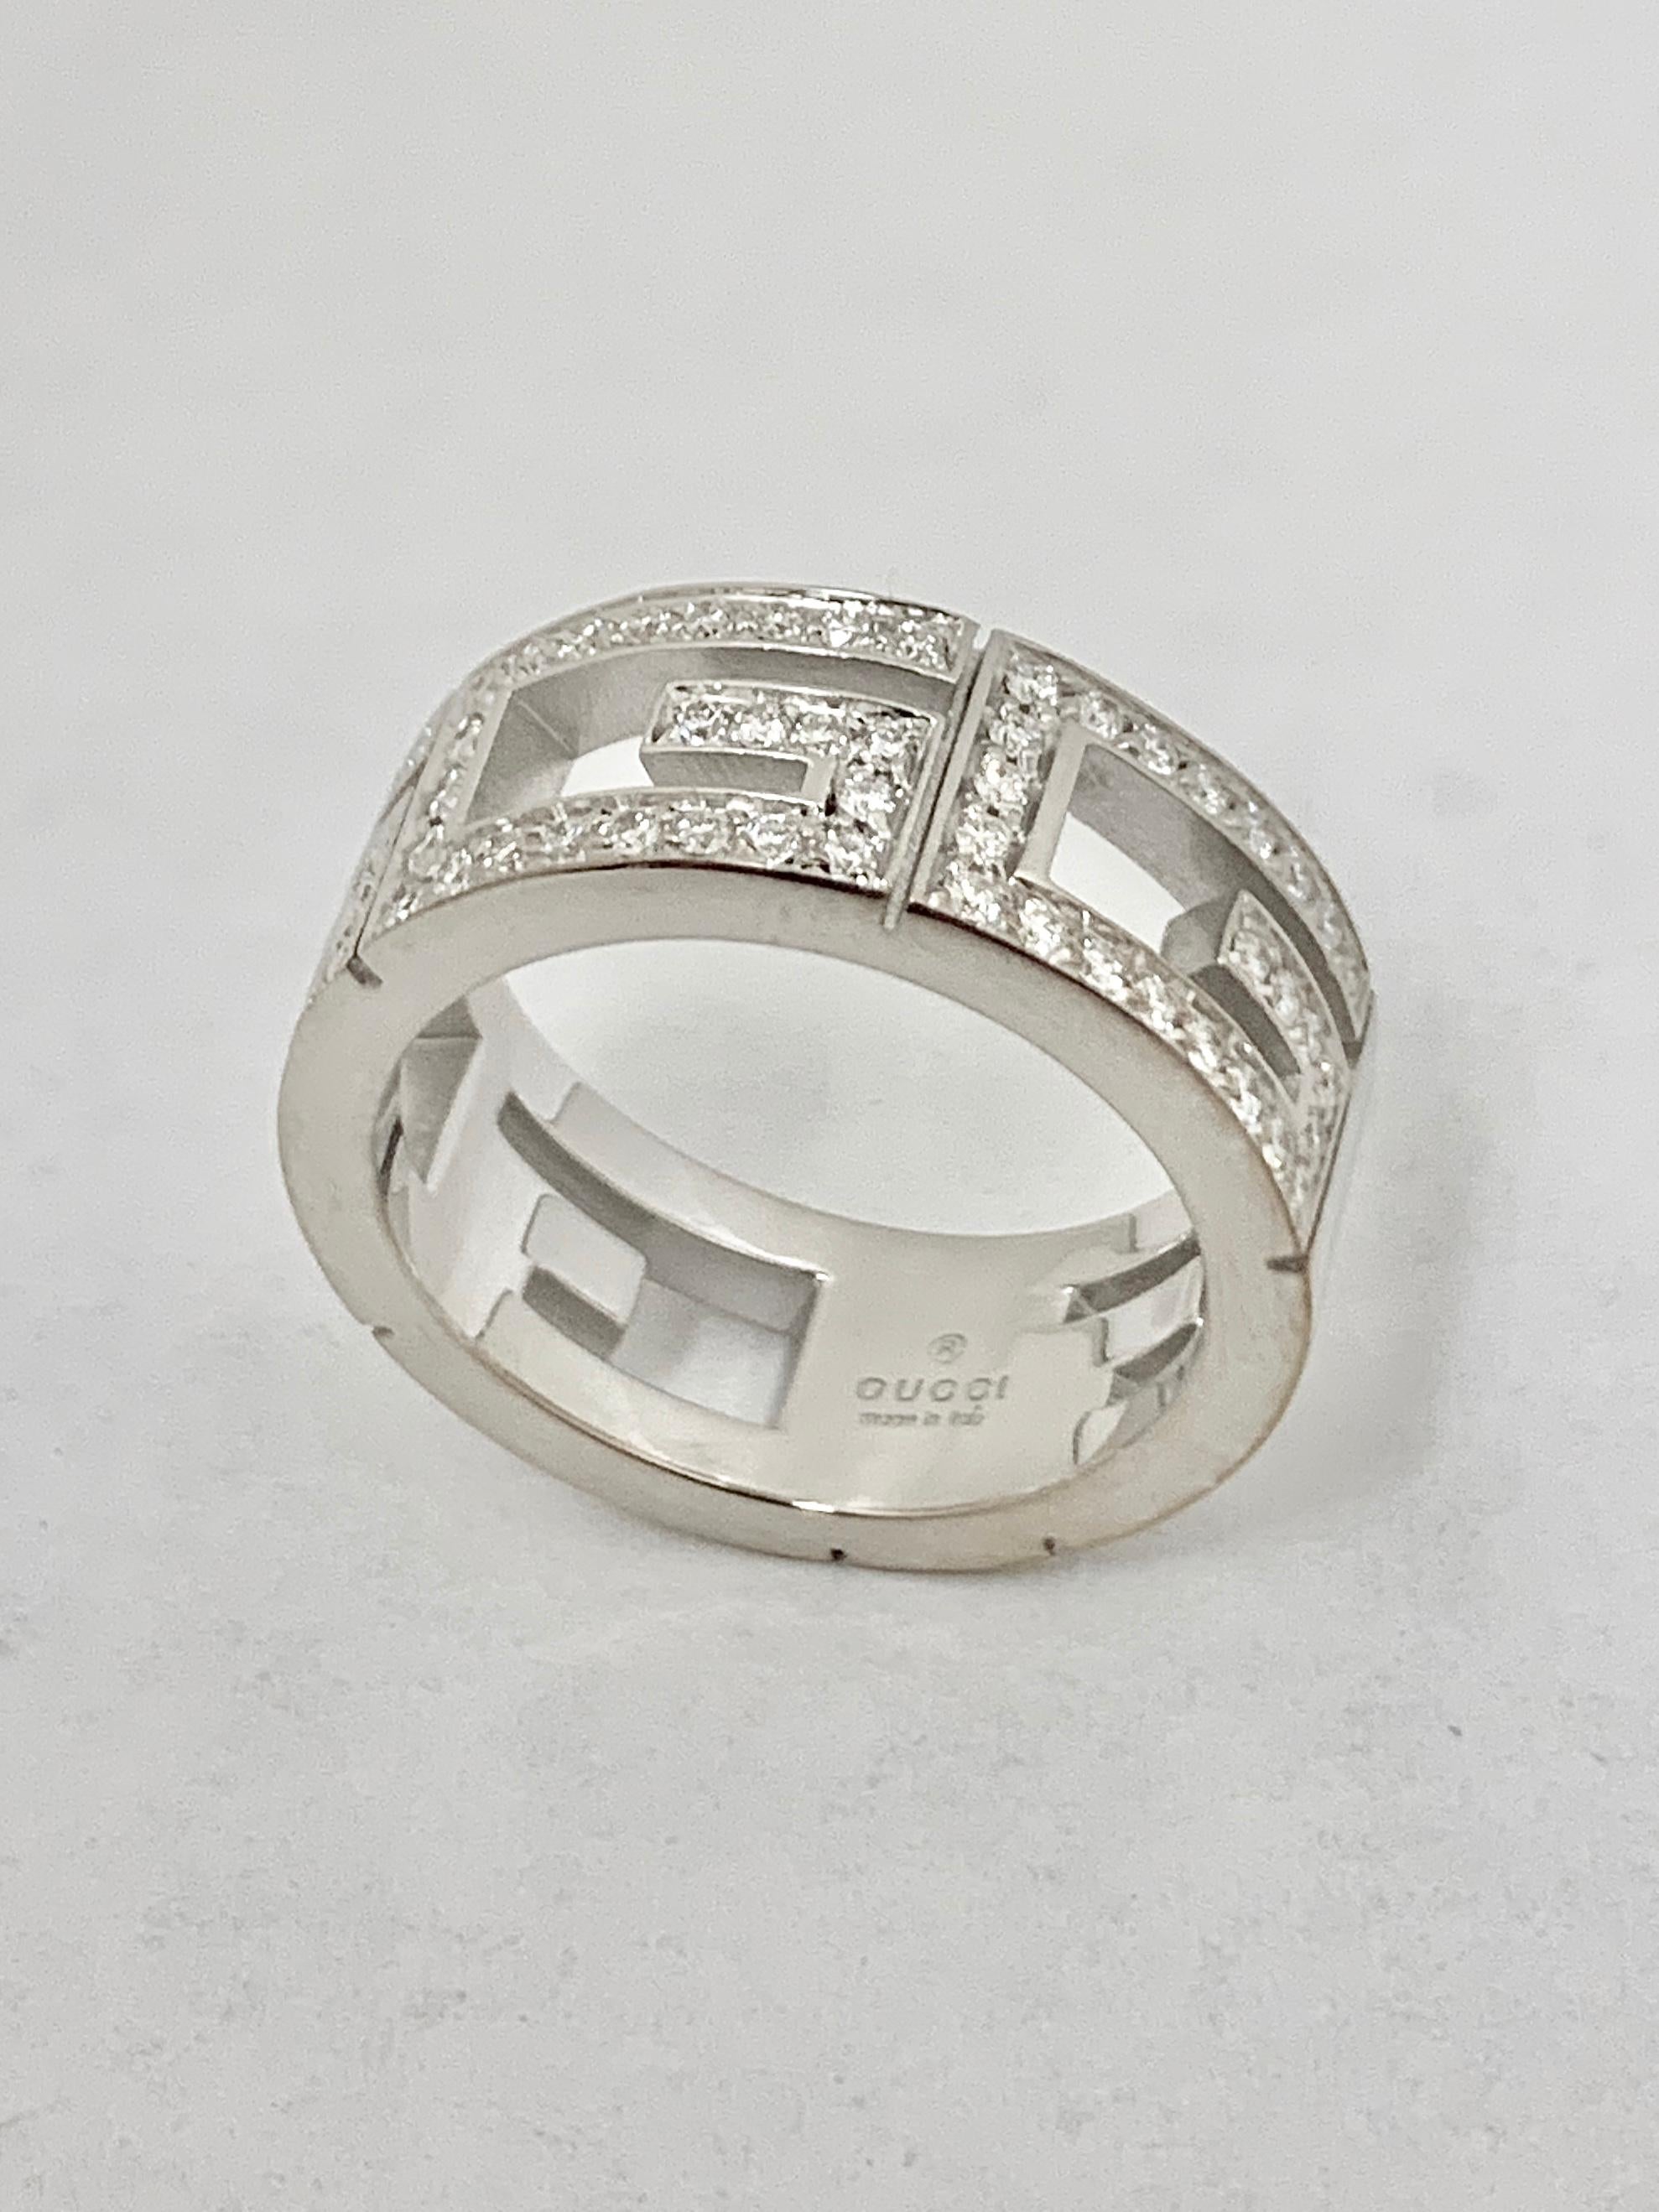 The Iconic 3G Logo ring by Gucci finely crafted in 18K white gold and set with fine round brilliant cut diamonds weighing 0.70 cts. total weight approximately.
Ring Size: 5
Stamp: Gucci , Made in Italy
Weight: 9 grams